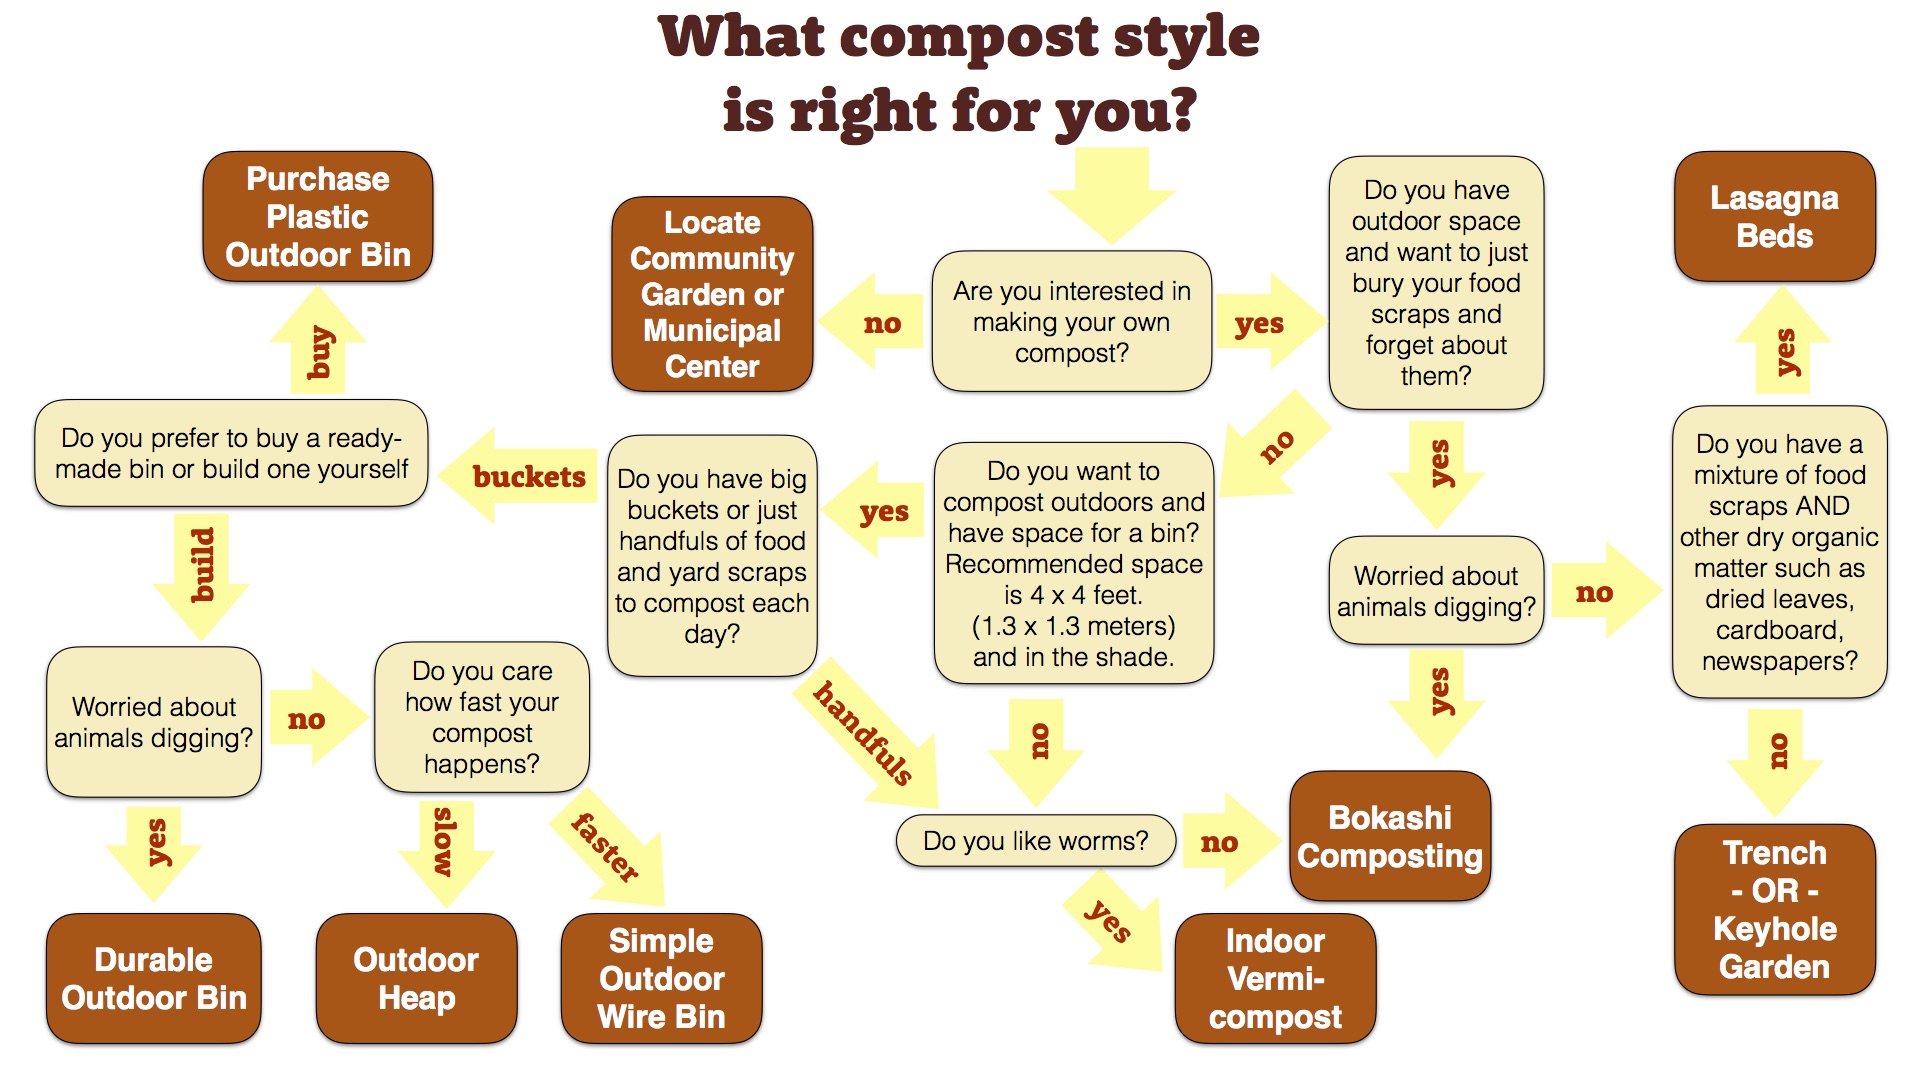 What composting style is right for you?